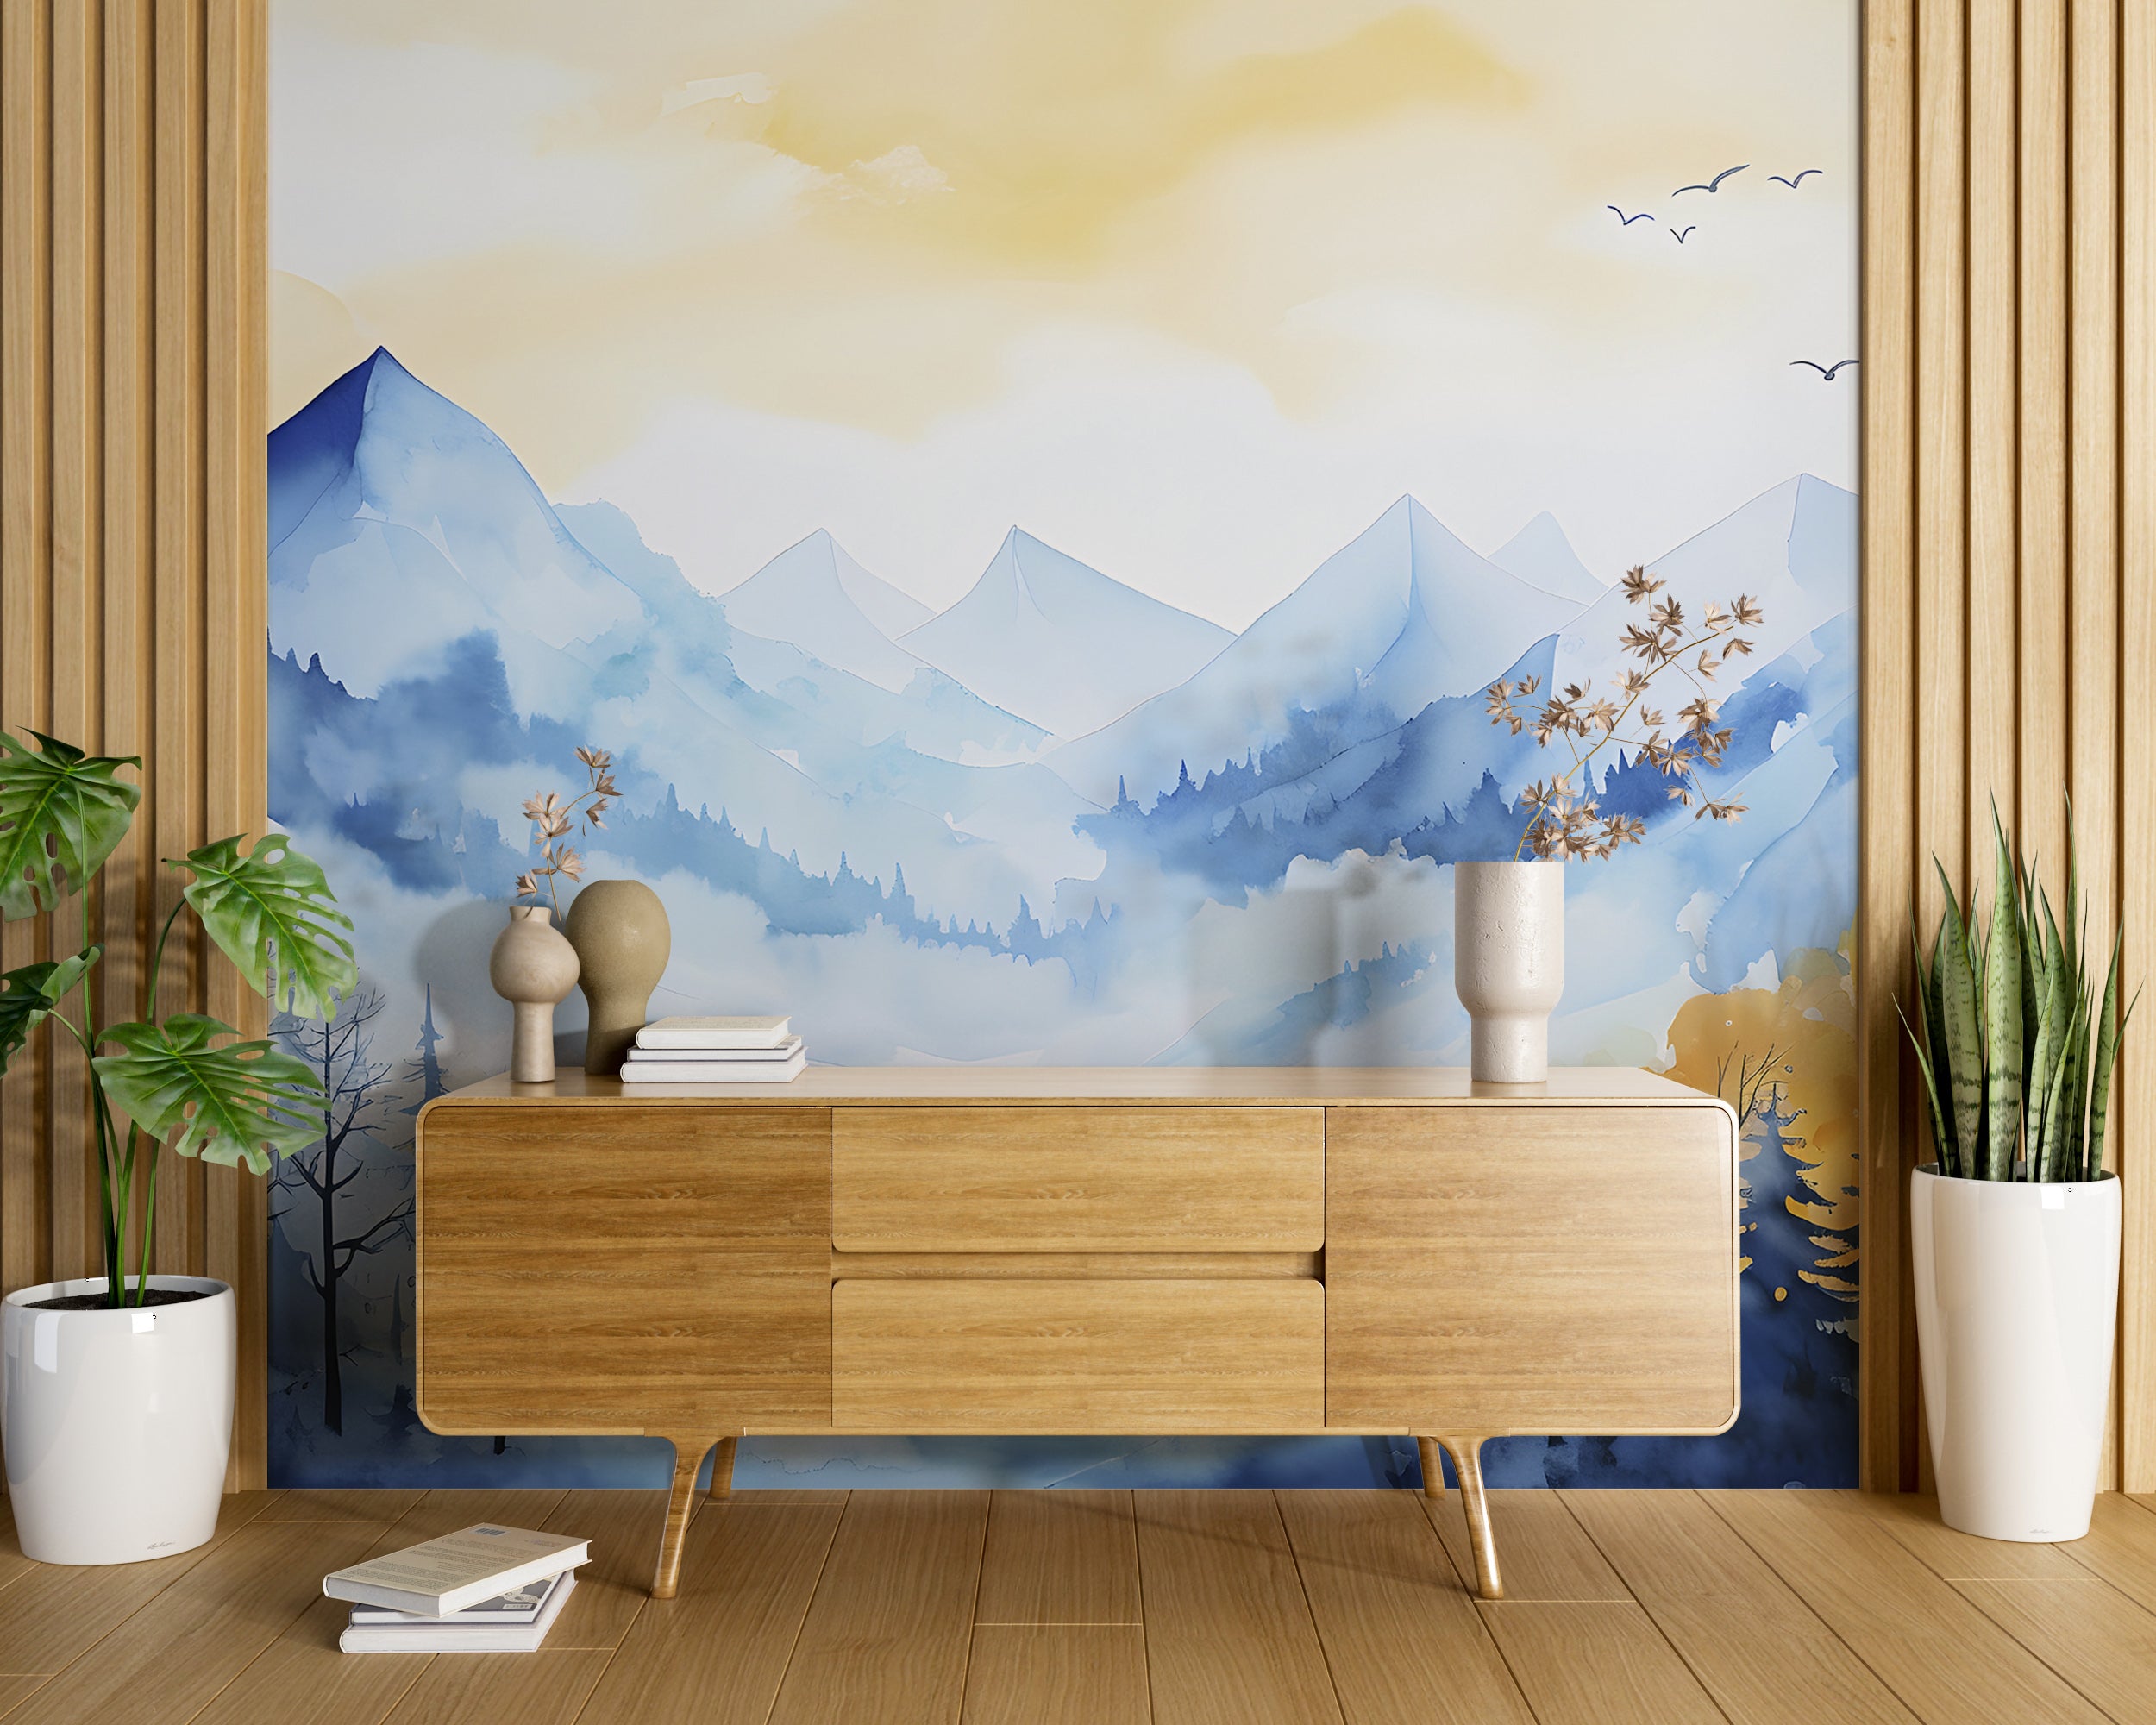 Easy-to-Install Nursery Wallpaper Decal